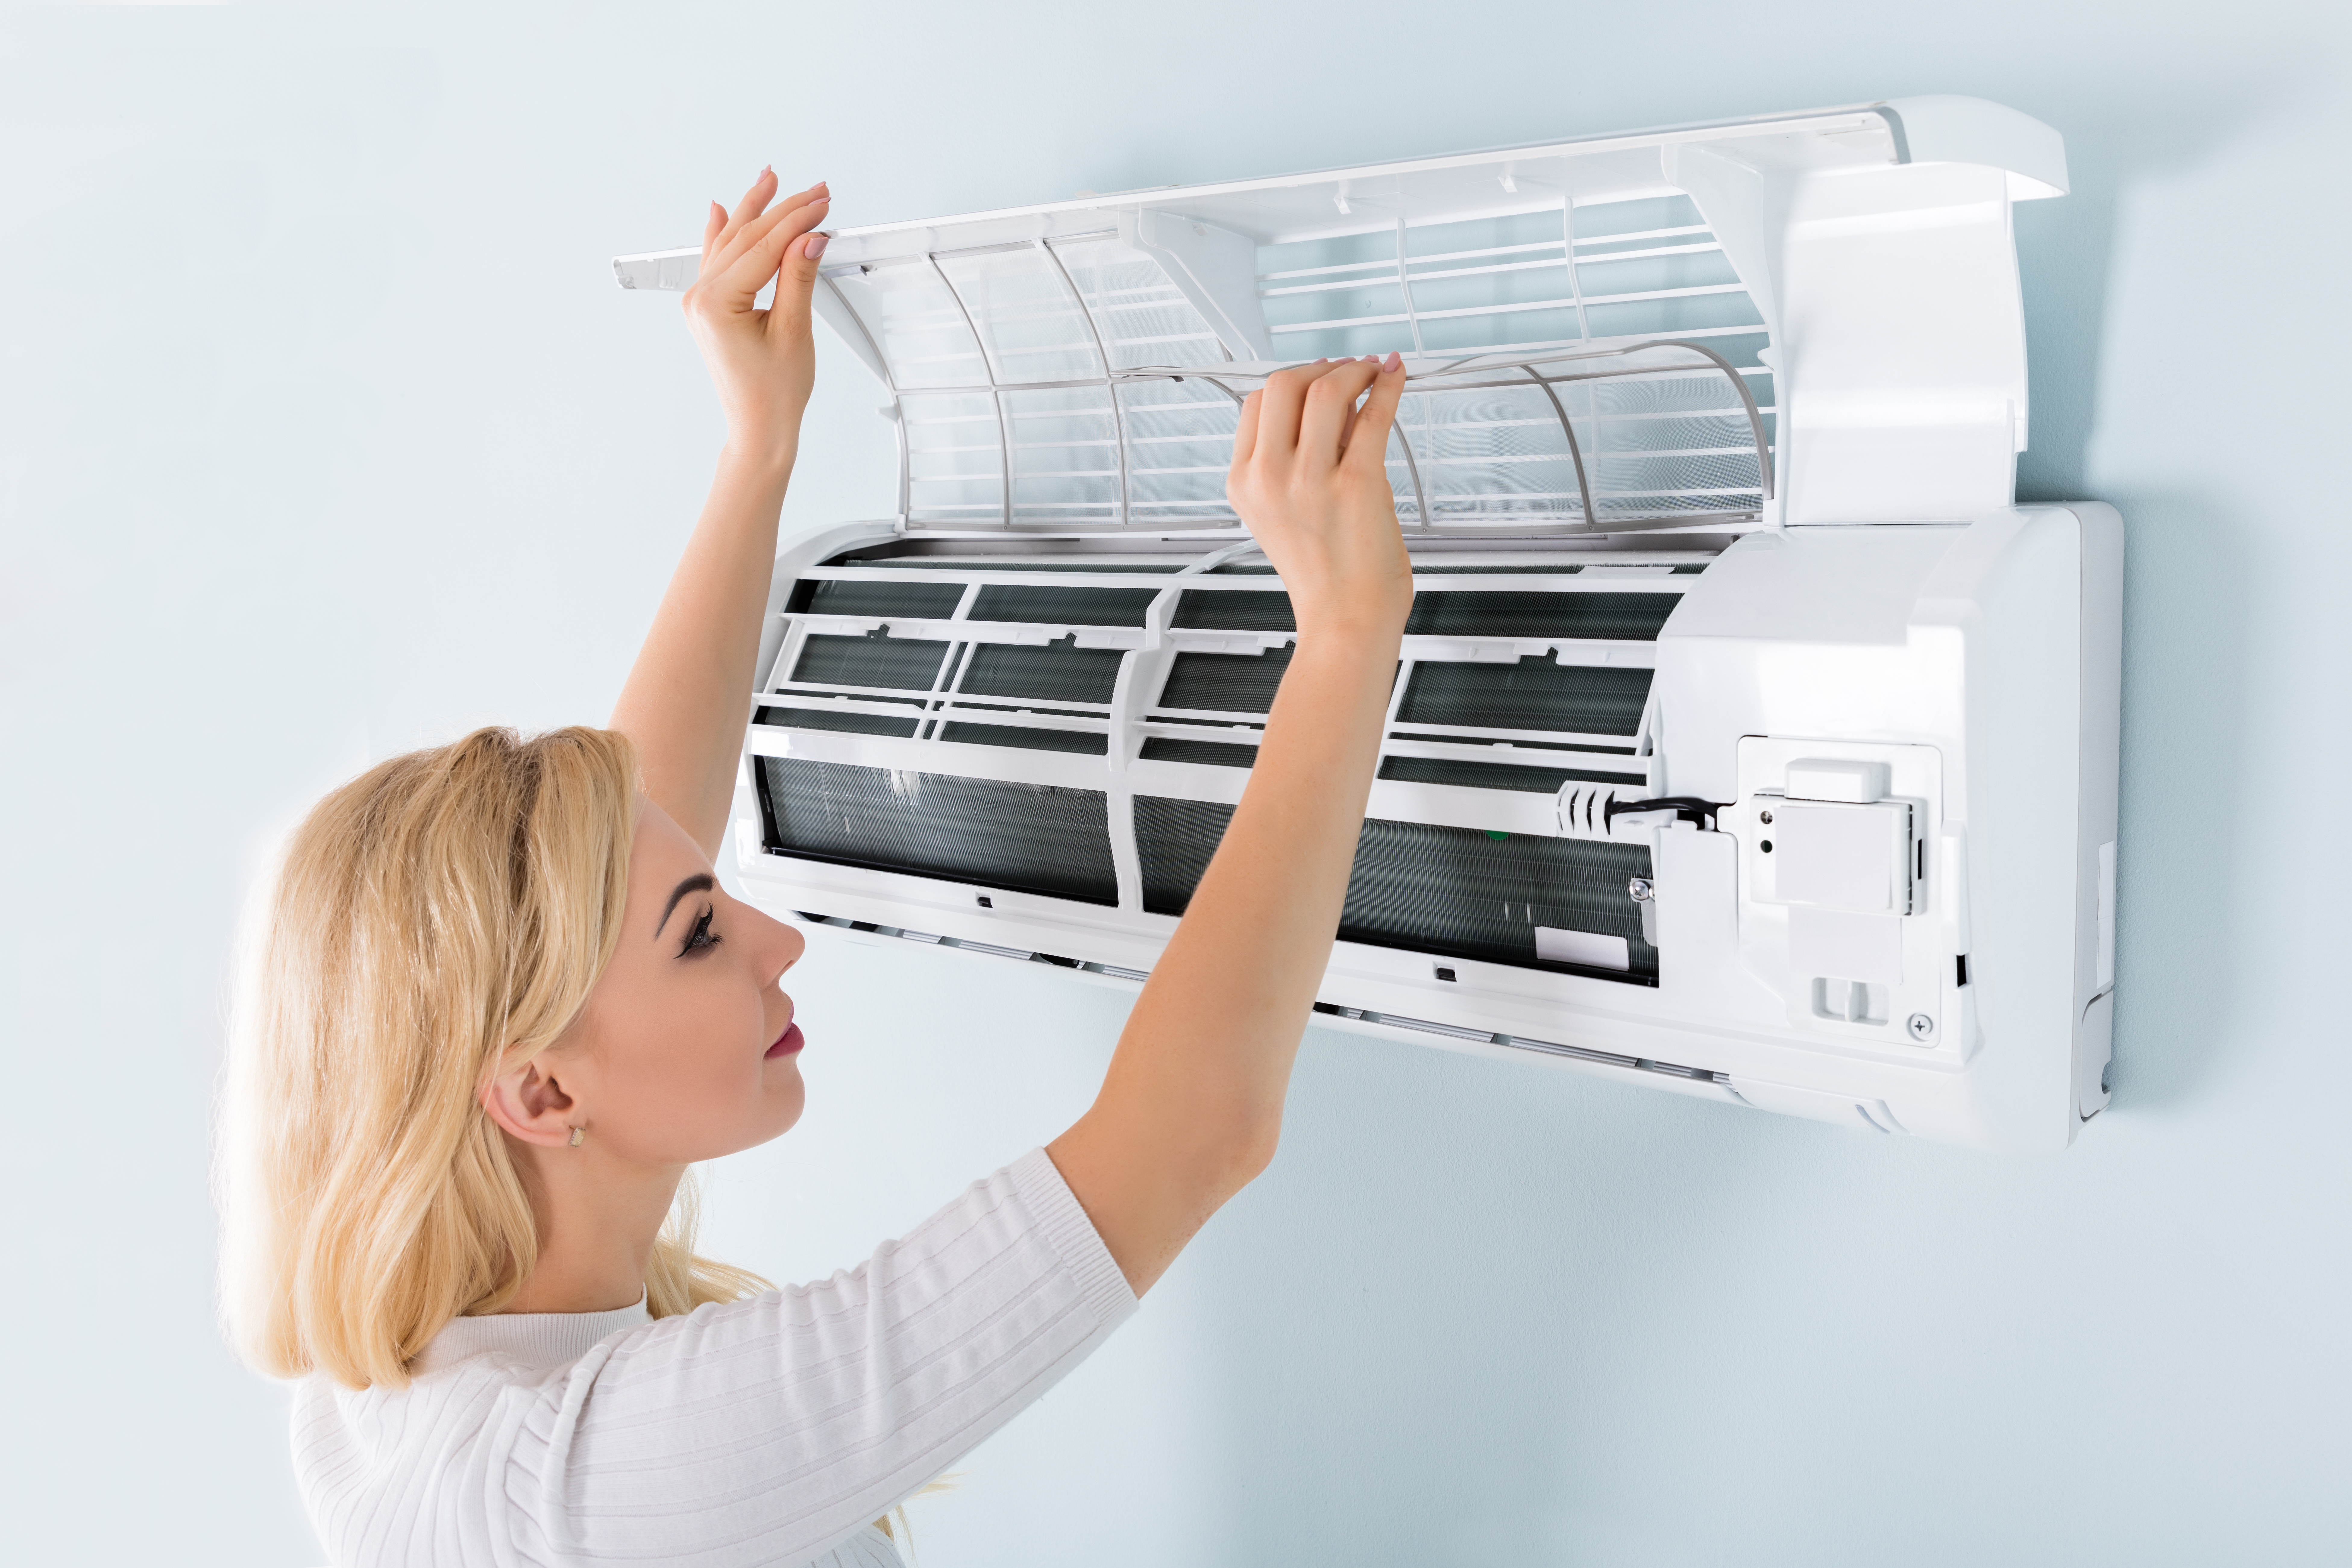 Recognize These Top 4 Home Air System Emergencies that Require an Expert